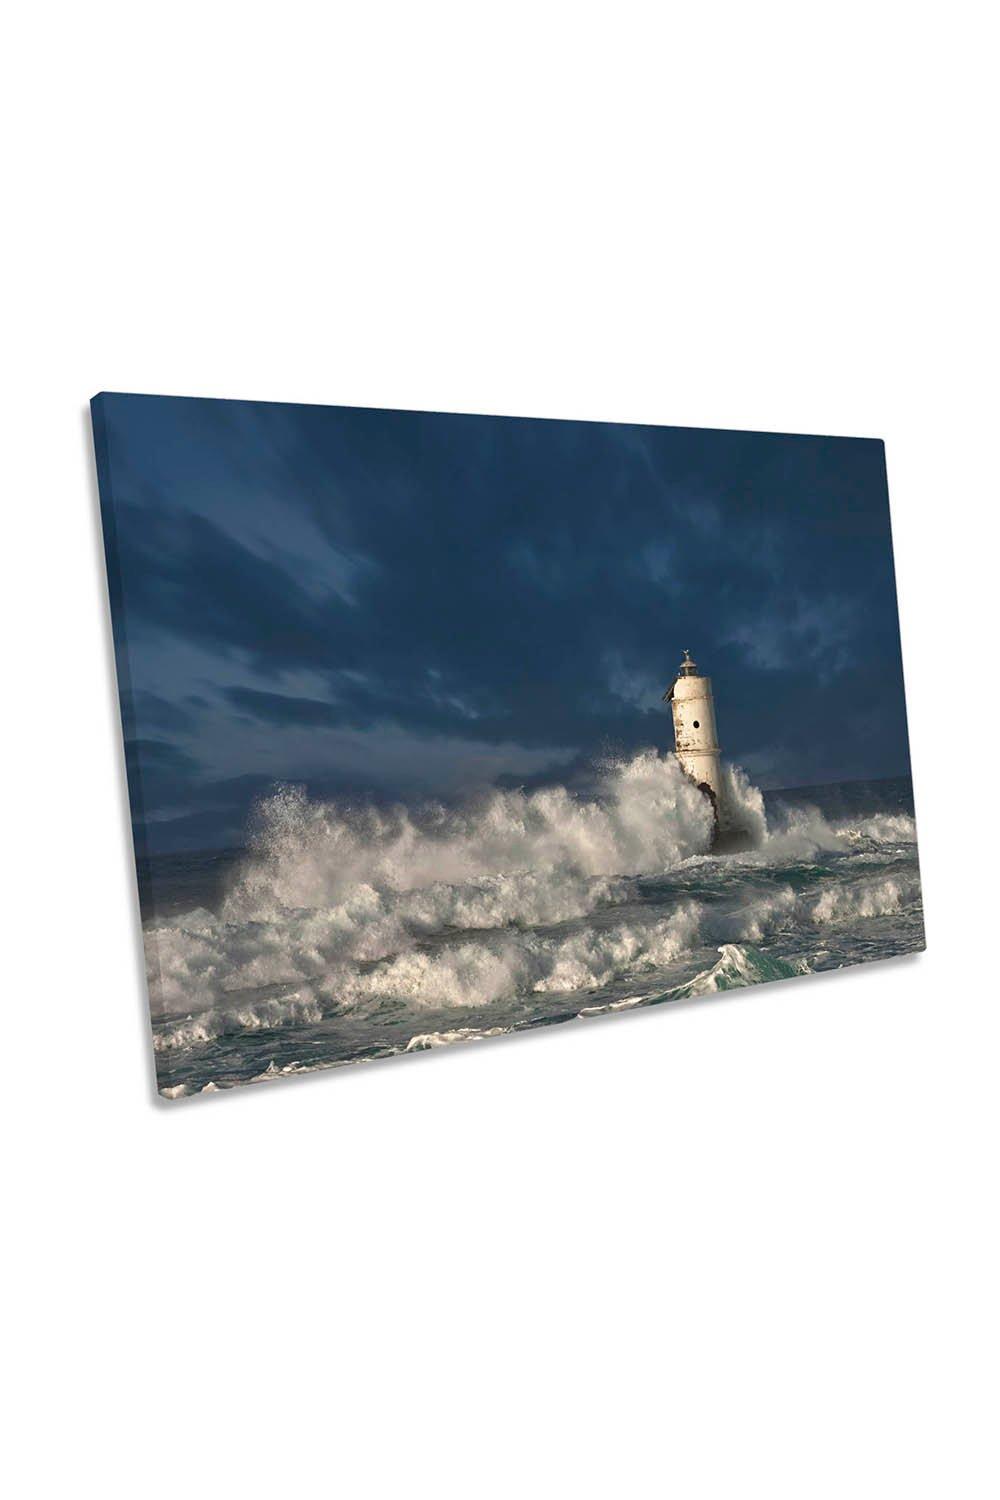 Lighthouse Crashing Waves Seascape Canvas Wall Art Picture Print